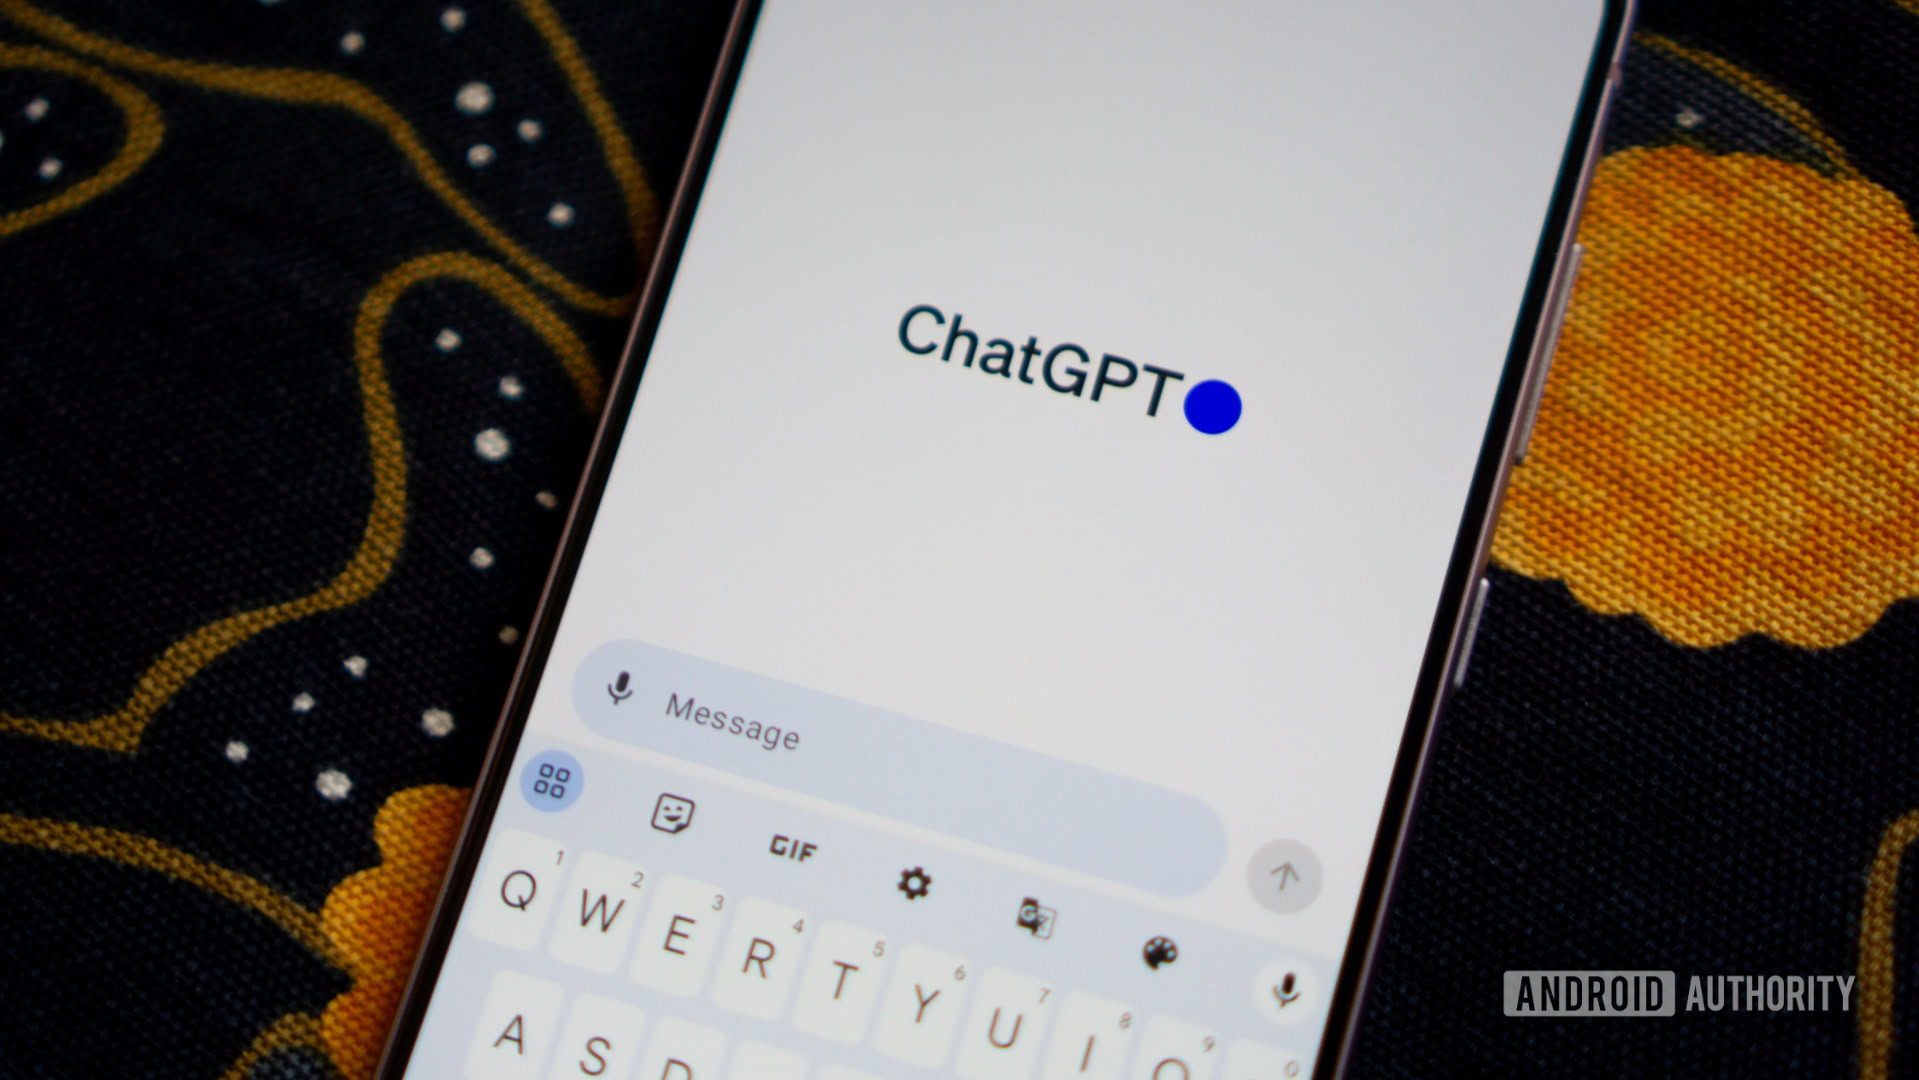 It’s not just you: ChatGPT is down for many users